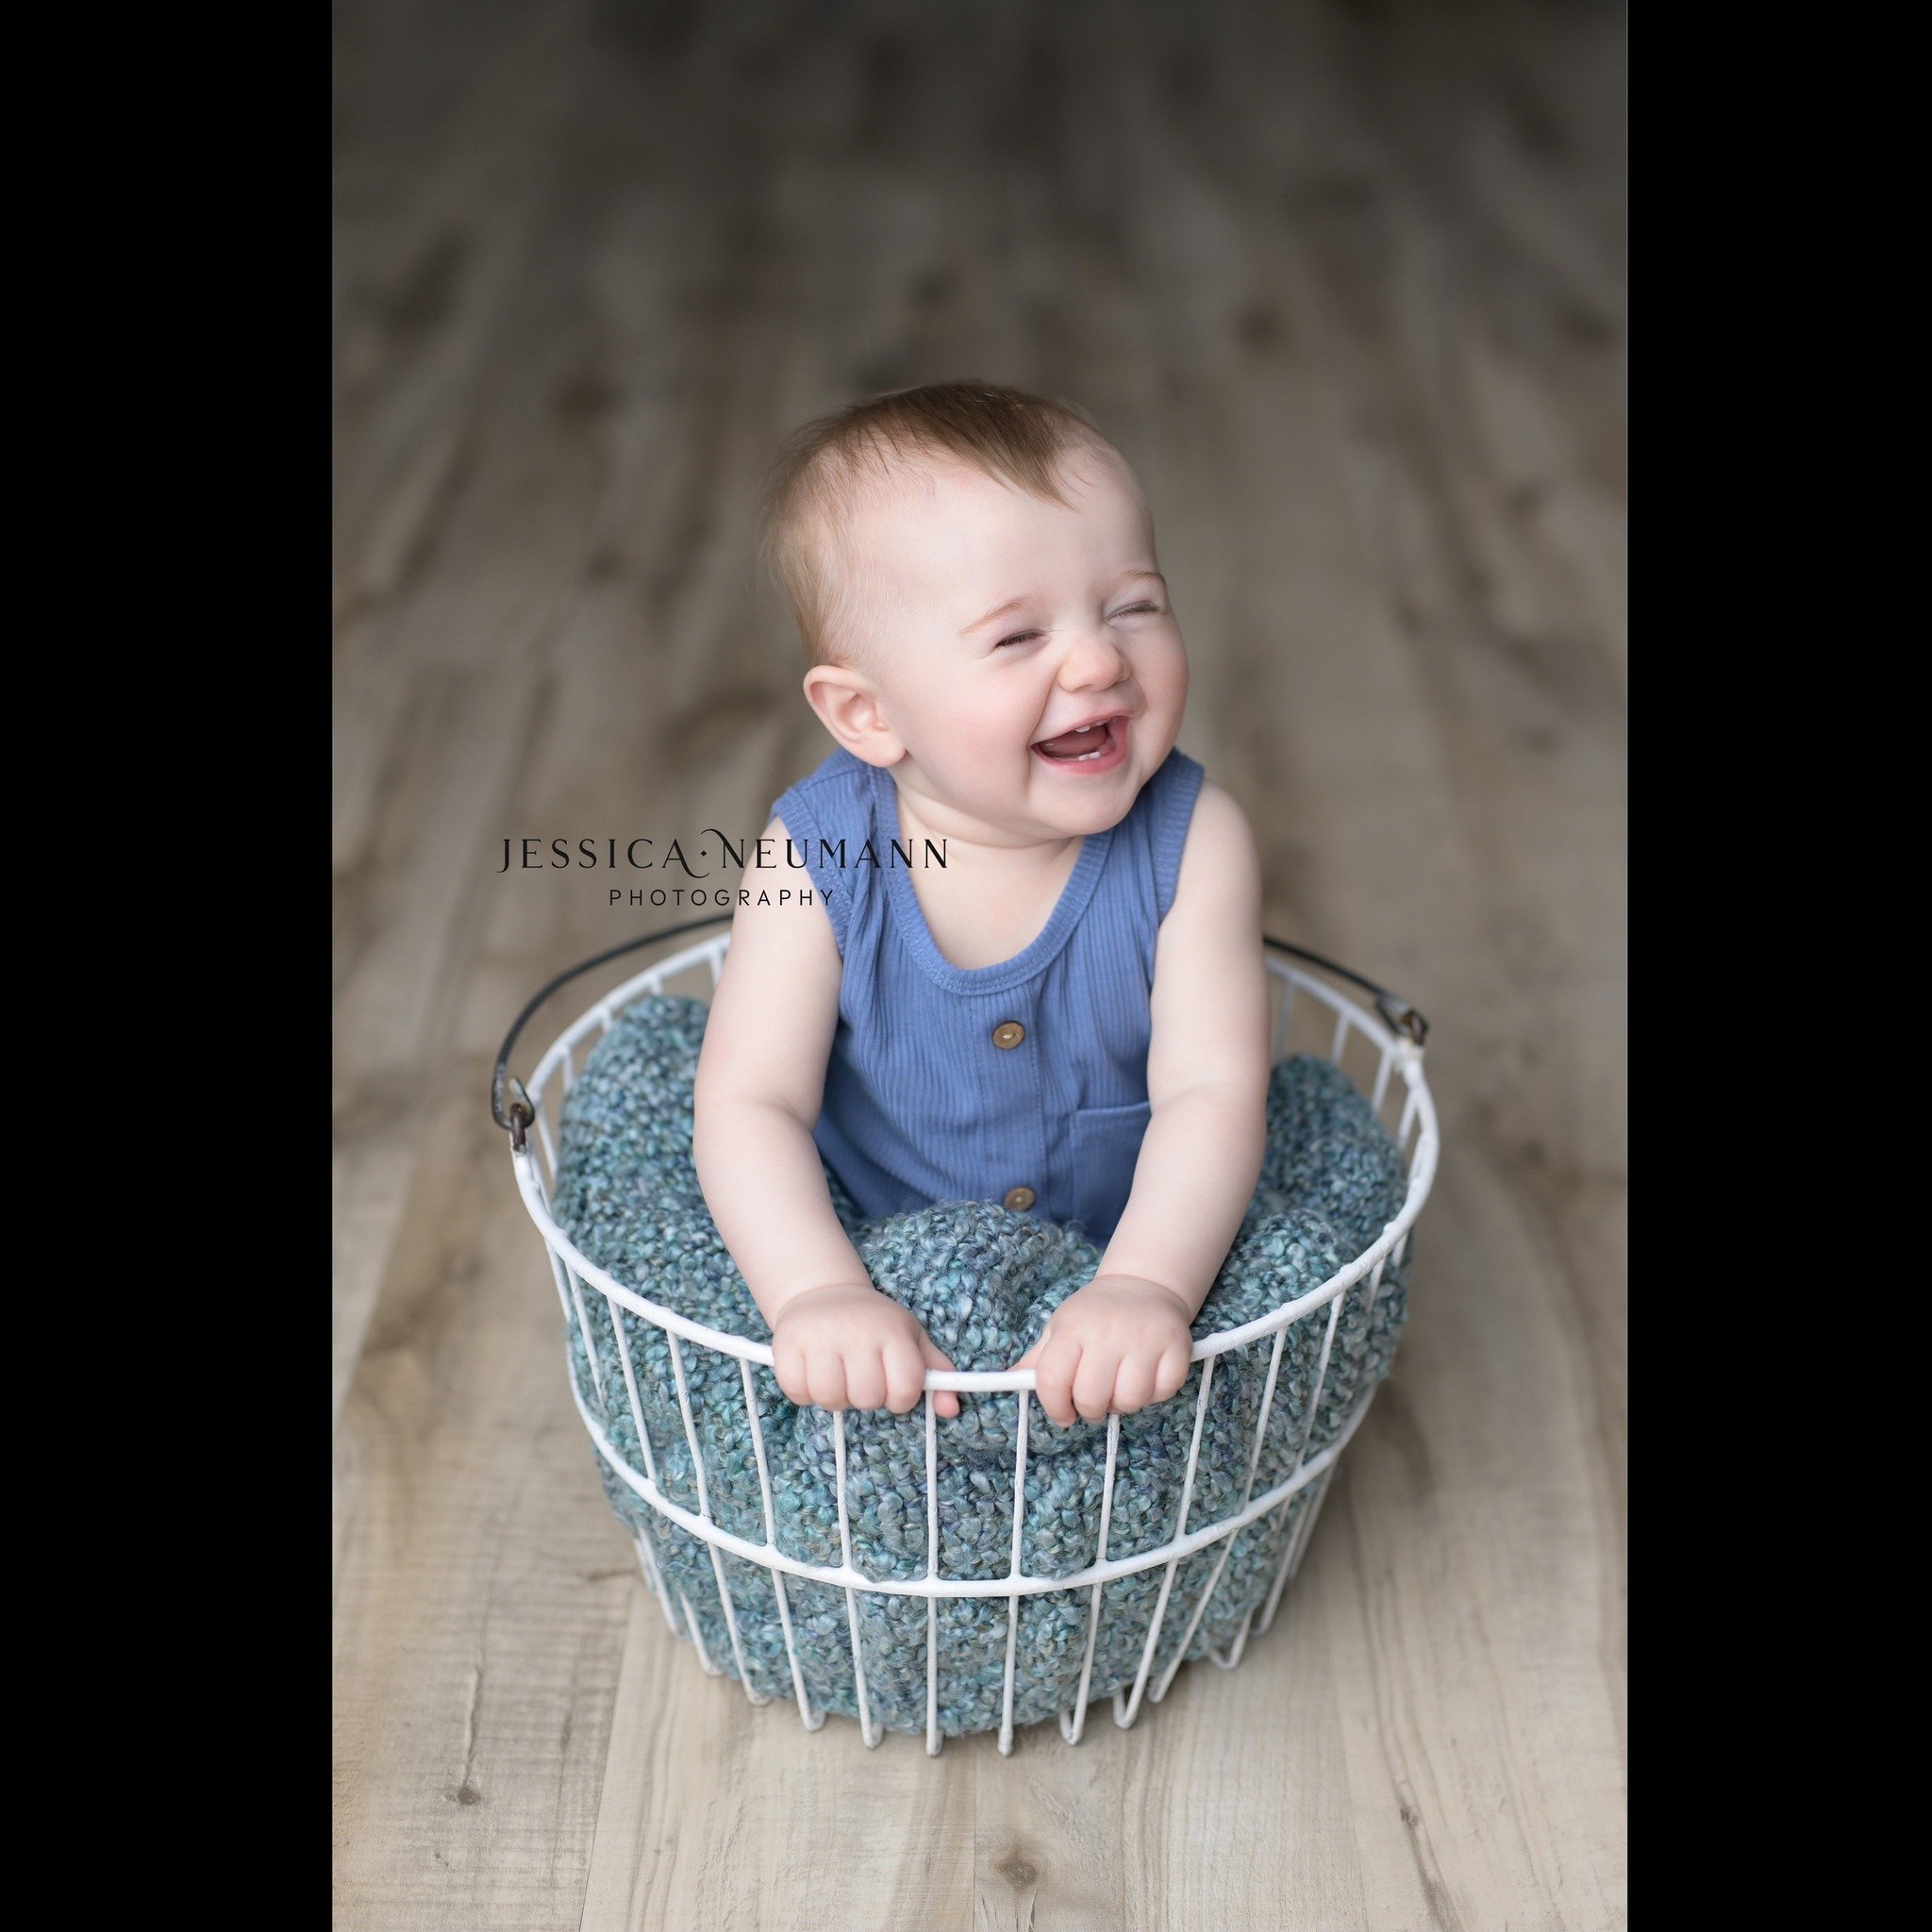 Baylor&rsquo;s sitter session was FULL of big cheesey smiles like this one! 

If you&rsquo;re interested in booking a session, head to my website for more examples of my work, and booking info: https://www.jessicaneumannphotography.com/getting-starte